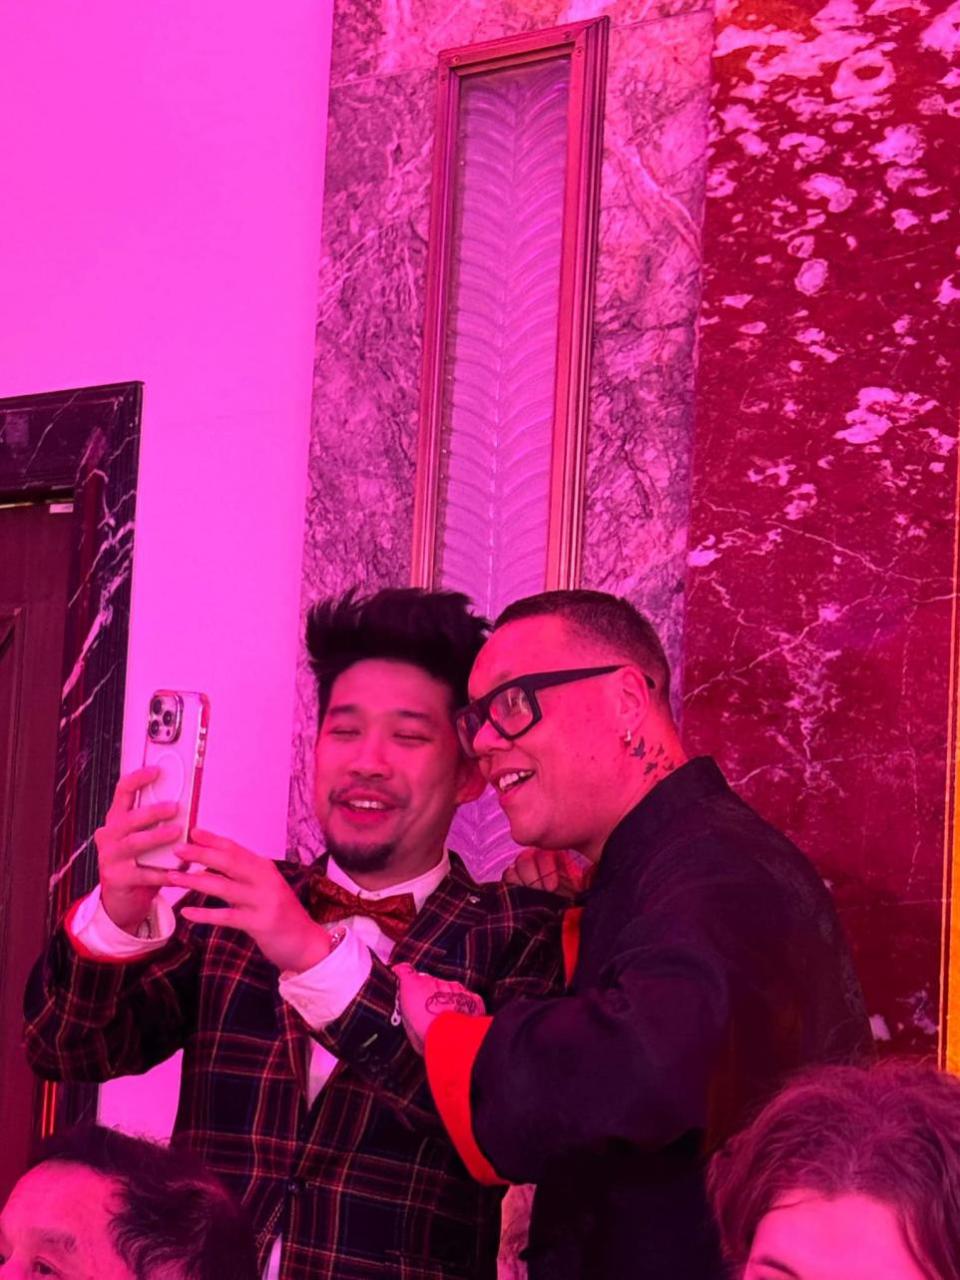 Western Telegraph: Lok is pictured with Golden Chopsticks Awards co-founder, Gok Wan.